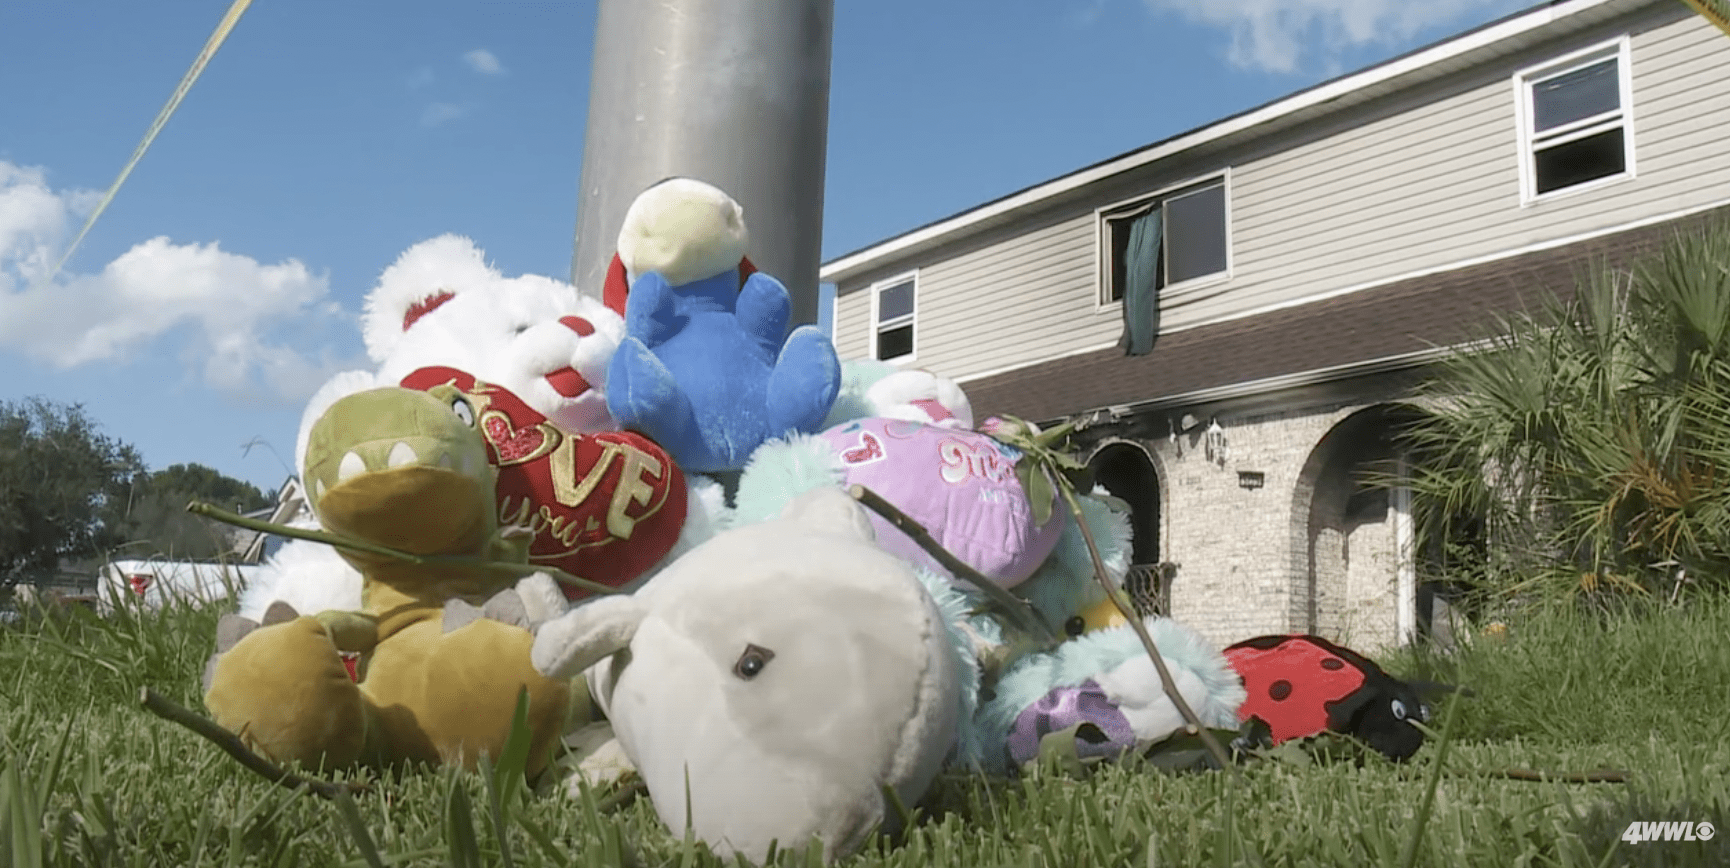 Stuffed toys left for the three children outside their home. | Source: YouTube.com/WWLTV